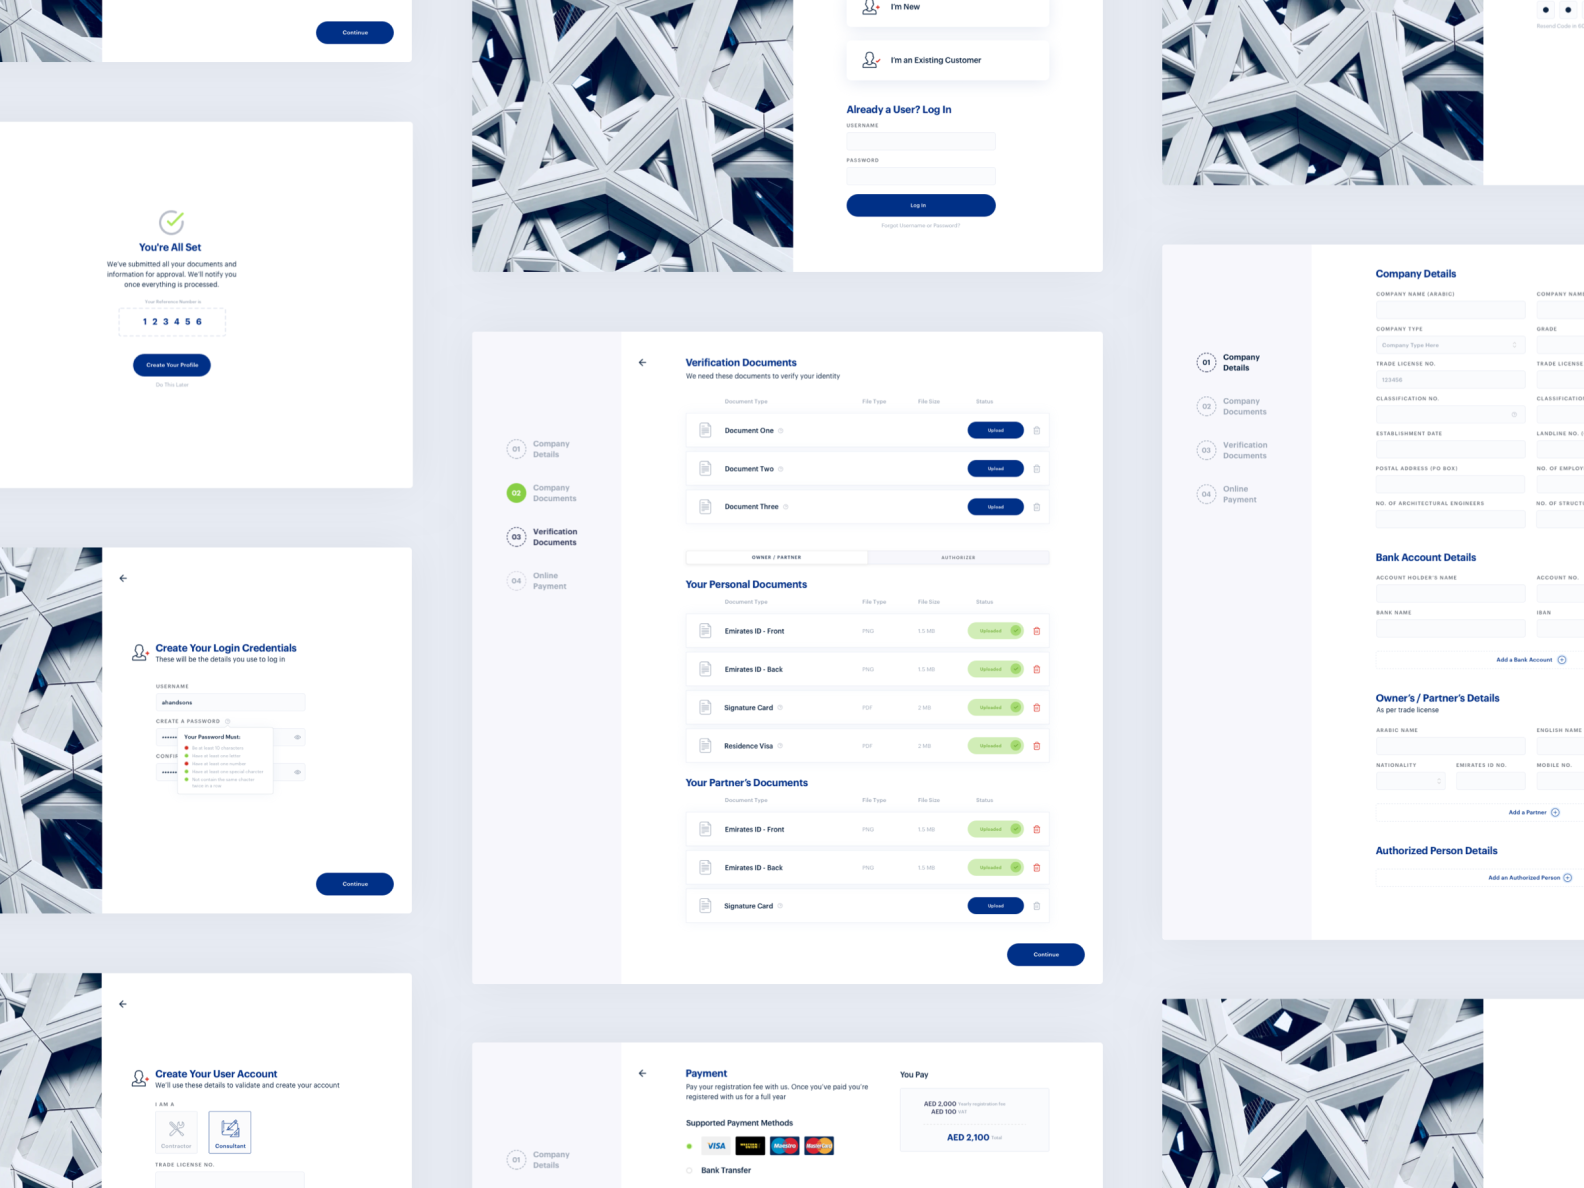 Vendor Onboarding Journey by Nathan Patton on Dribbble